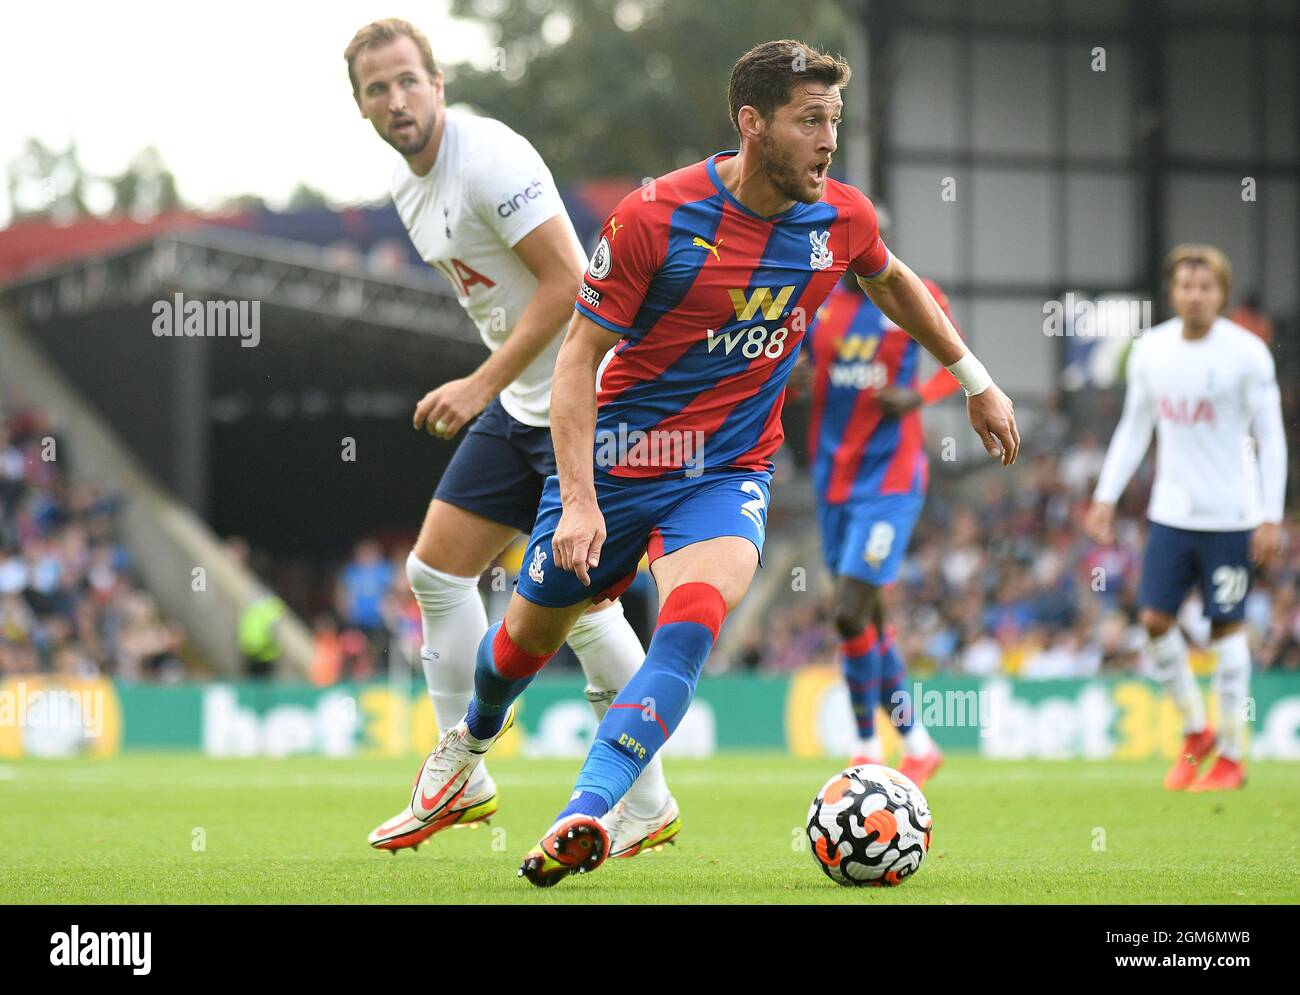 LONDON, ENGLAND - SEPTEMBER 11, 2021: Joel Edward Philip Ward of Palace pictured during the 2021/22 Premier League matchweek 4 game between Crystal Palace FC and Tottenham Hotspur FC at Selhurst Park. Copyright: Cosmin Iftode/Picstaff Stock Photo